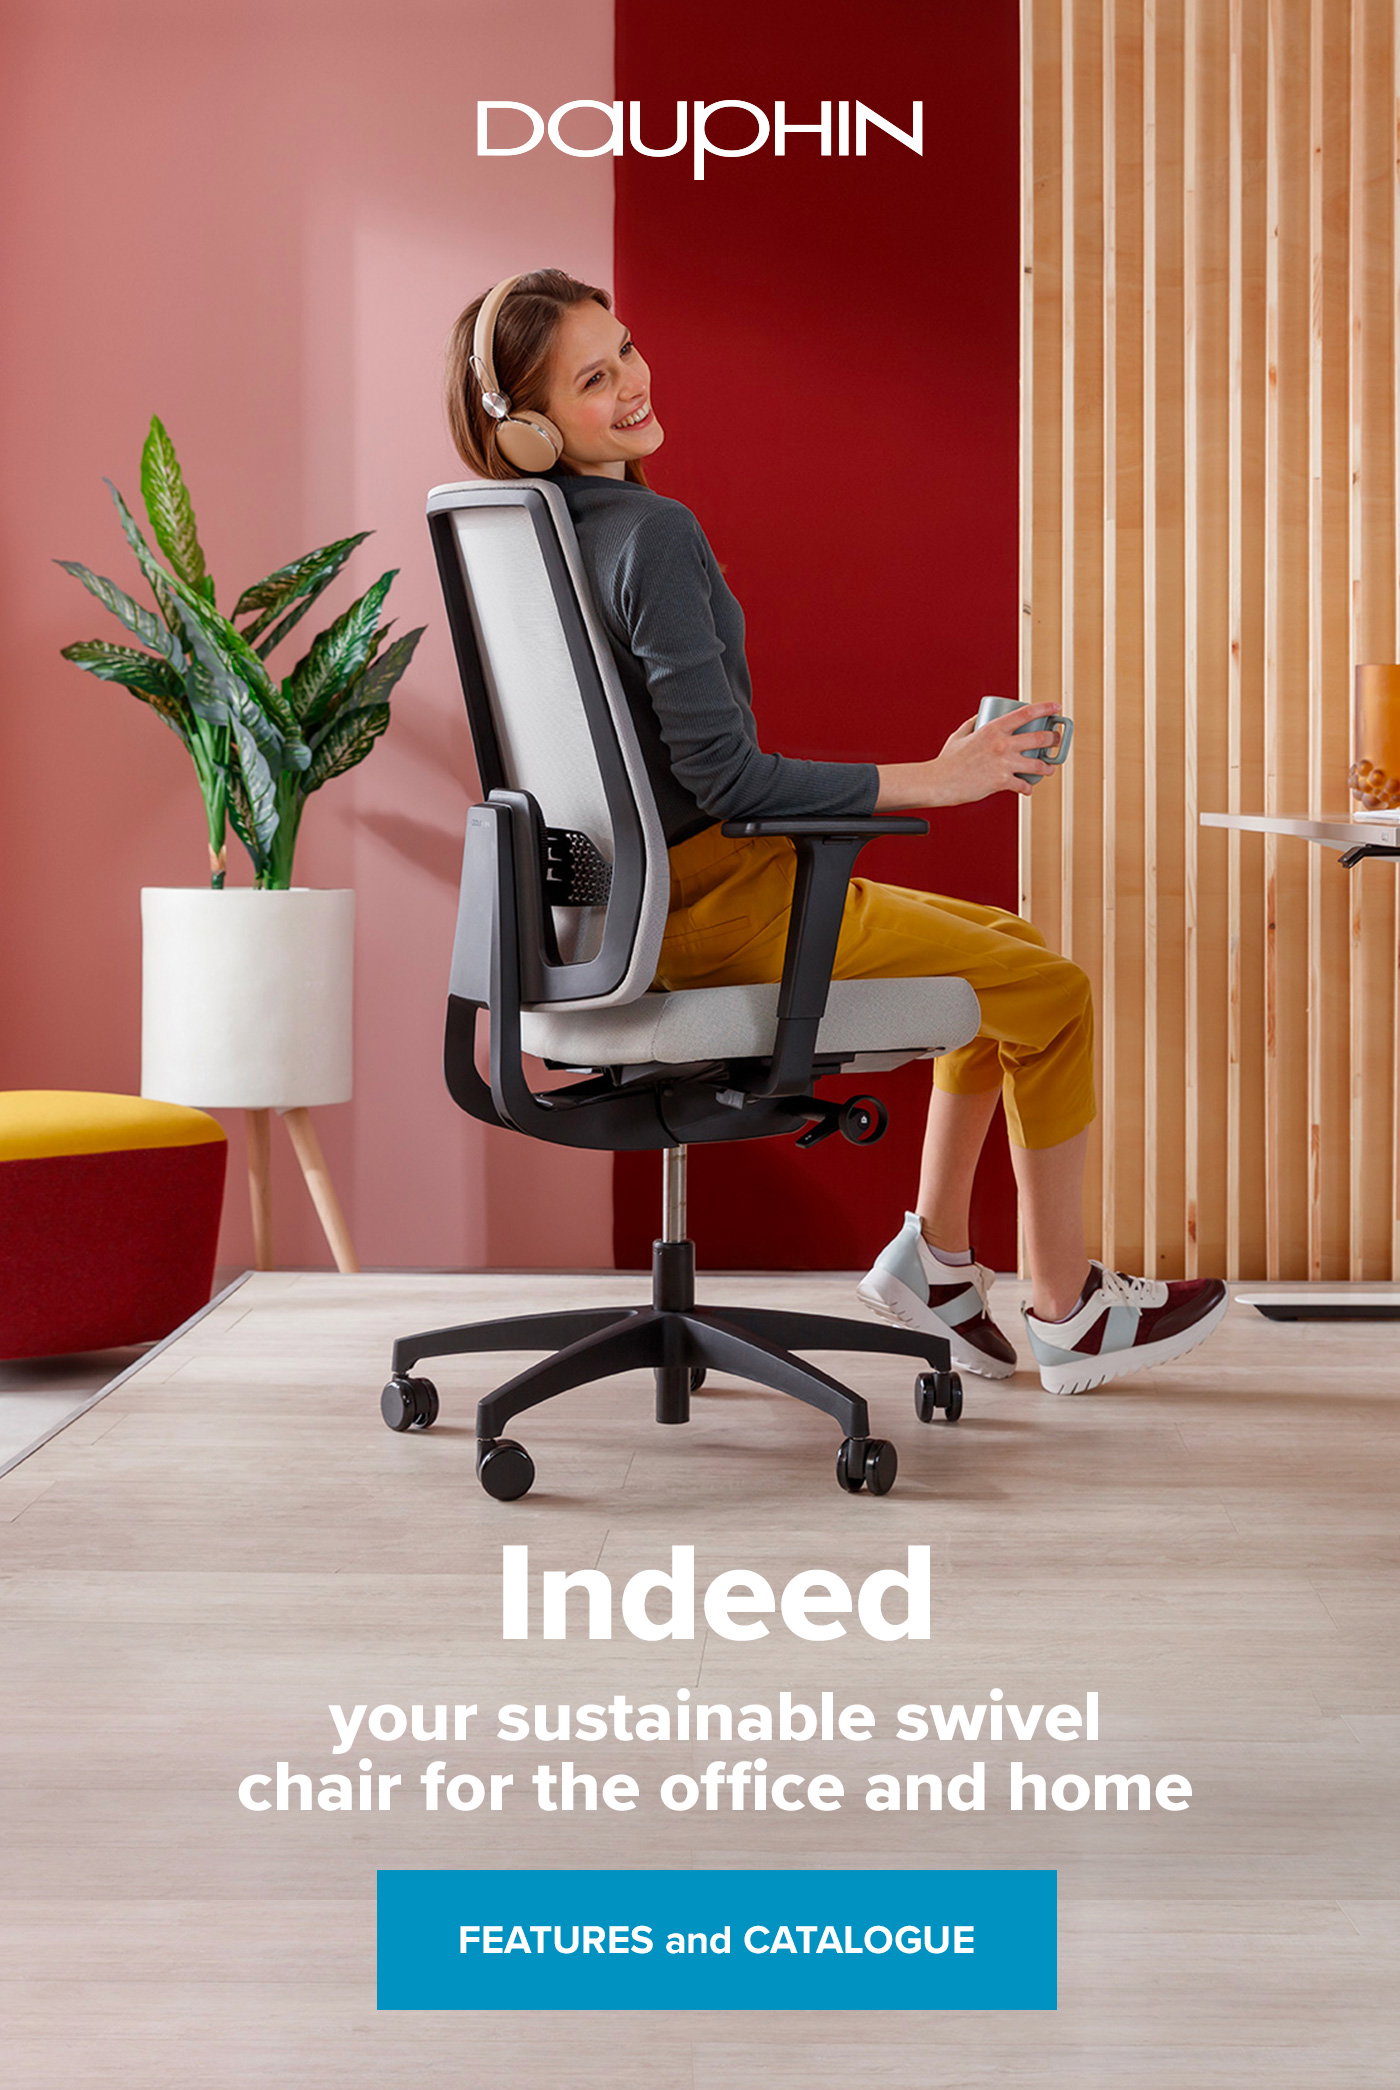 archiproducts: Swivel office chair Indeed: straight, slender, smart - by  Dauphin | Milled